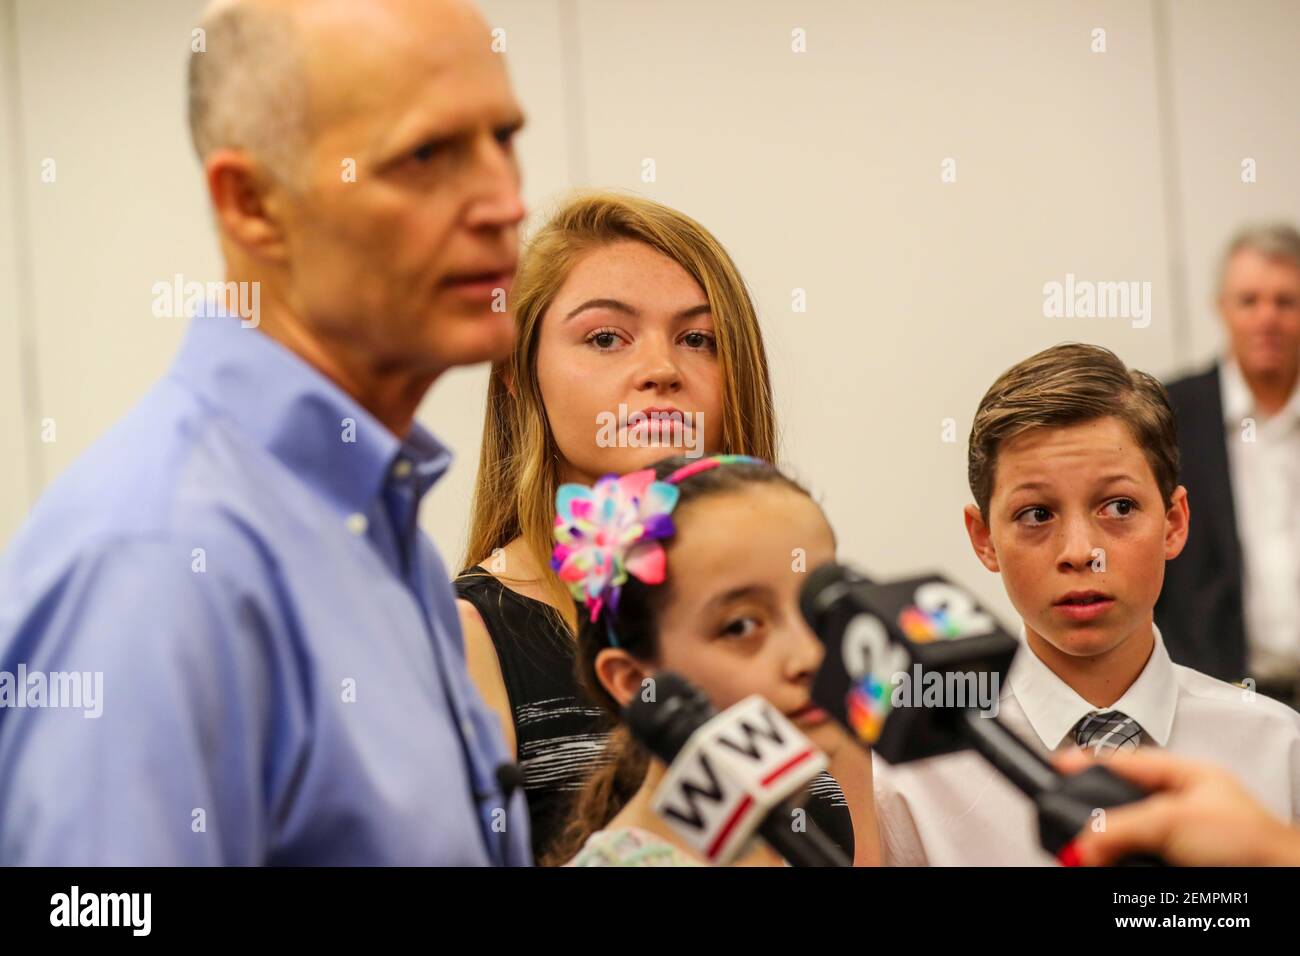 Emmabella Rudd, 17 of Sarasota, looks on as Senator Rick Scott stopped in Fort Myers to make an announcement regarding efforts to make healthcare more affordable and accessible for Florida families. The press conference was held at the Southwest Florida International Airport Wright Brothers Conference Room, Fort Myers, Florida on Mar. 29, 2019. A few Florida children with Type 1 diabetes, Sabine Rivera, 12 of Naples, Emmabella Rudd, 17 of Sarasota, and Lucas Lye, 14 of Naples, were on hand to tell their stories about how their families deal with the cost of insulin.  Fnp0327 Am Boatingsafety ( Stock Photo